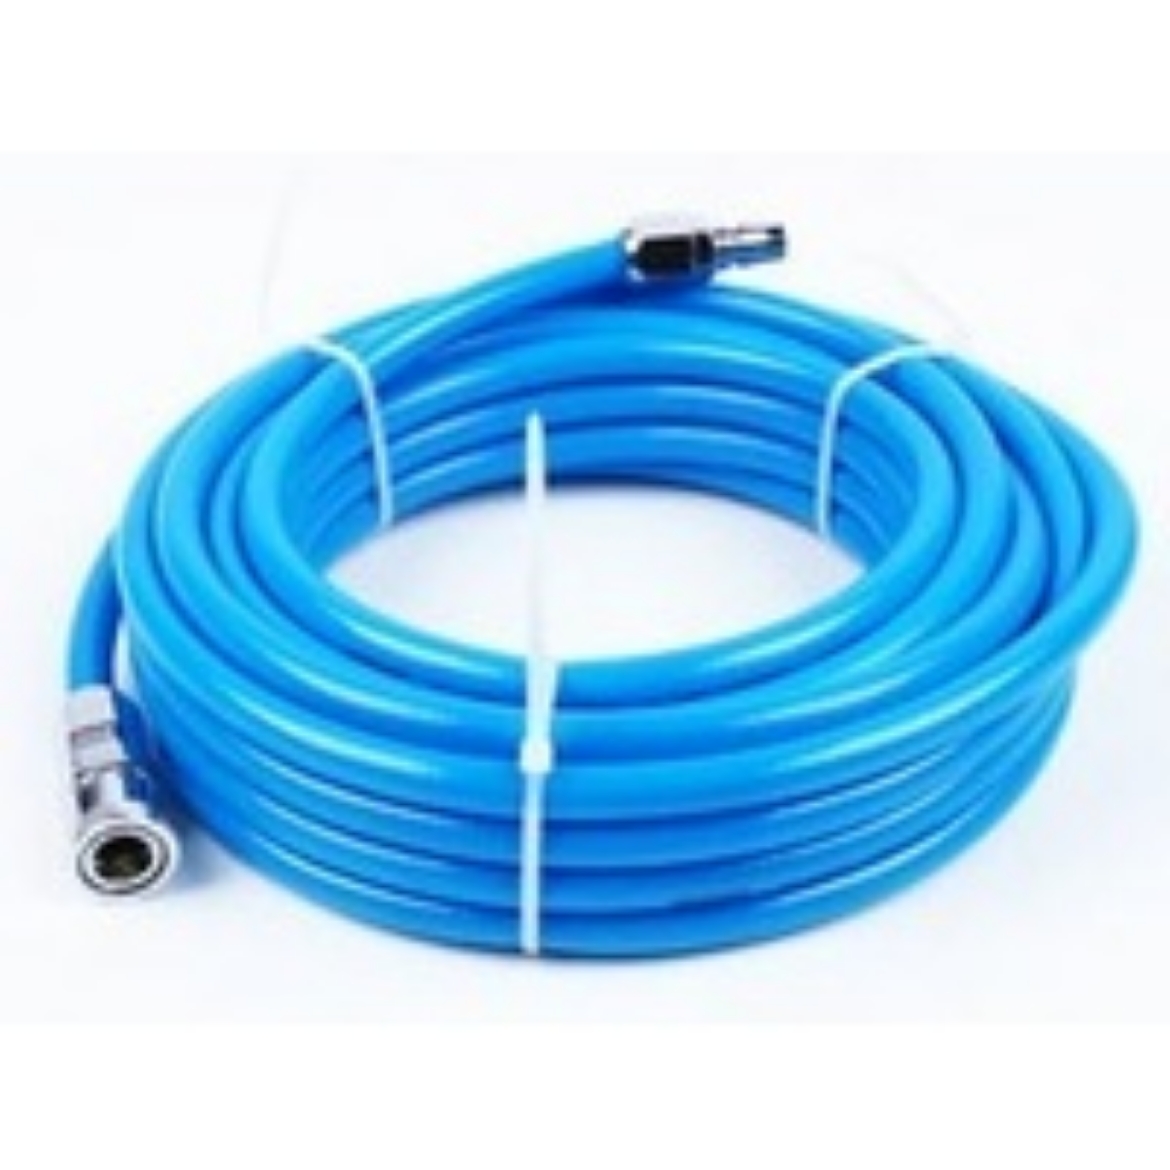 Picture of AIR/WATER HOSE 1/2" (12mm) 30M Fitted with Nitto One Touch Blue